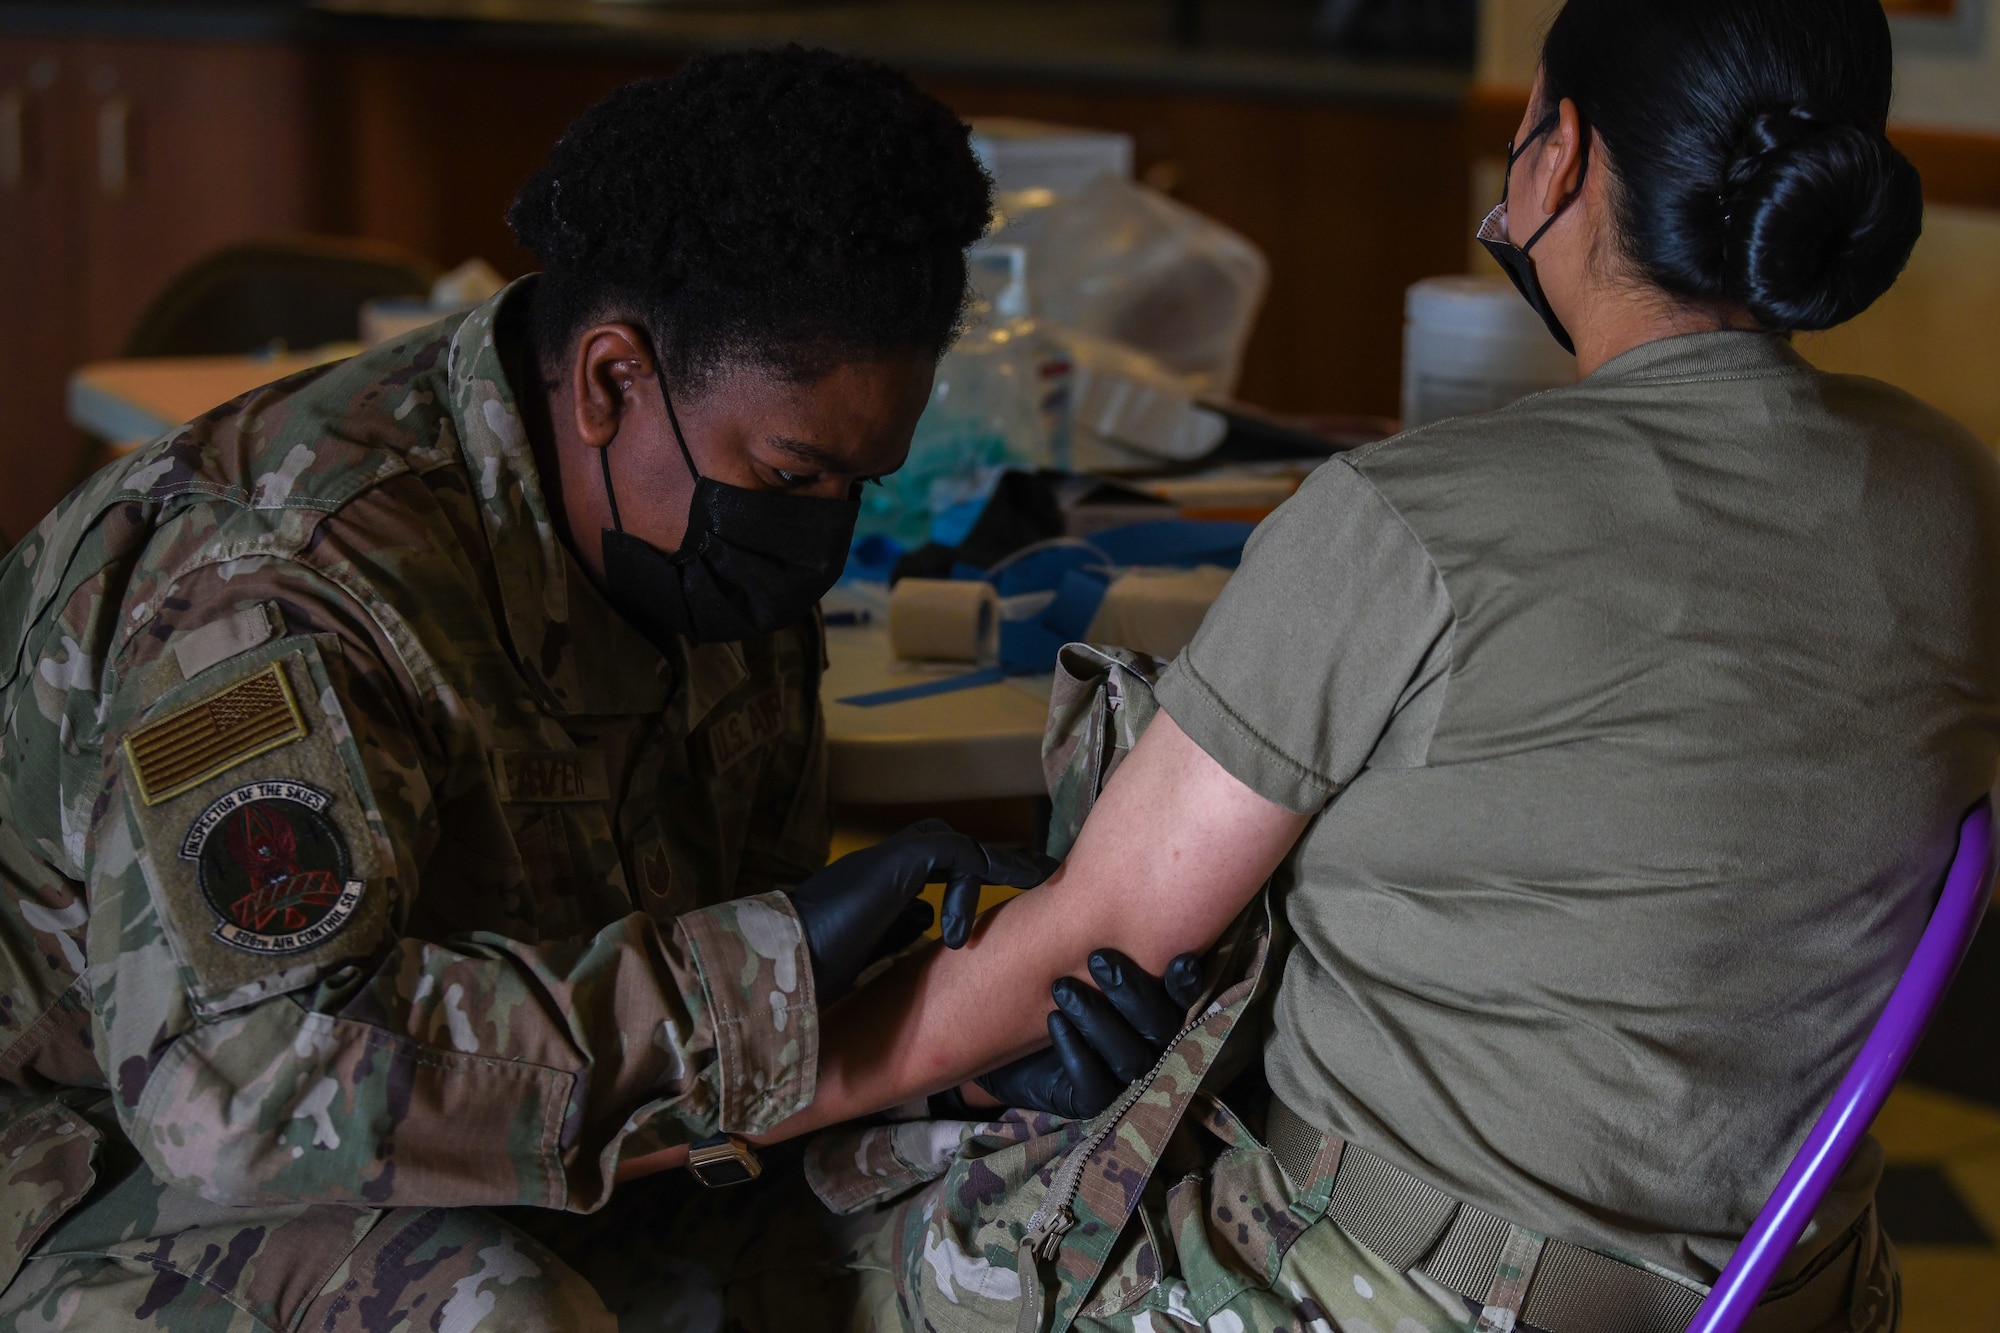 Tech. Sgt. Kimberly Weaver, 606th Air Control Squadron noncommissioned officer in charge of medical readiness, checks for a vein before inserting a needle at Aviano Air Base, Italy, May 4, 2021. Independent Duty Medical Technicians are the only enlisted health care provider who can give care in the absence of a licensed, privileged or credentialed health care provider. (U.S. Air Force photo by Senior Airman Ericka A. Woolever)